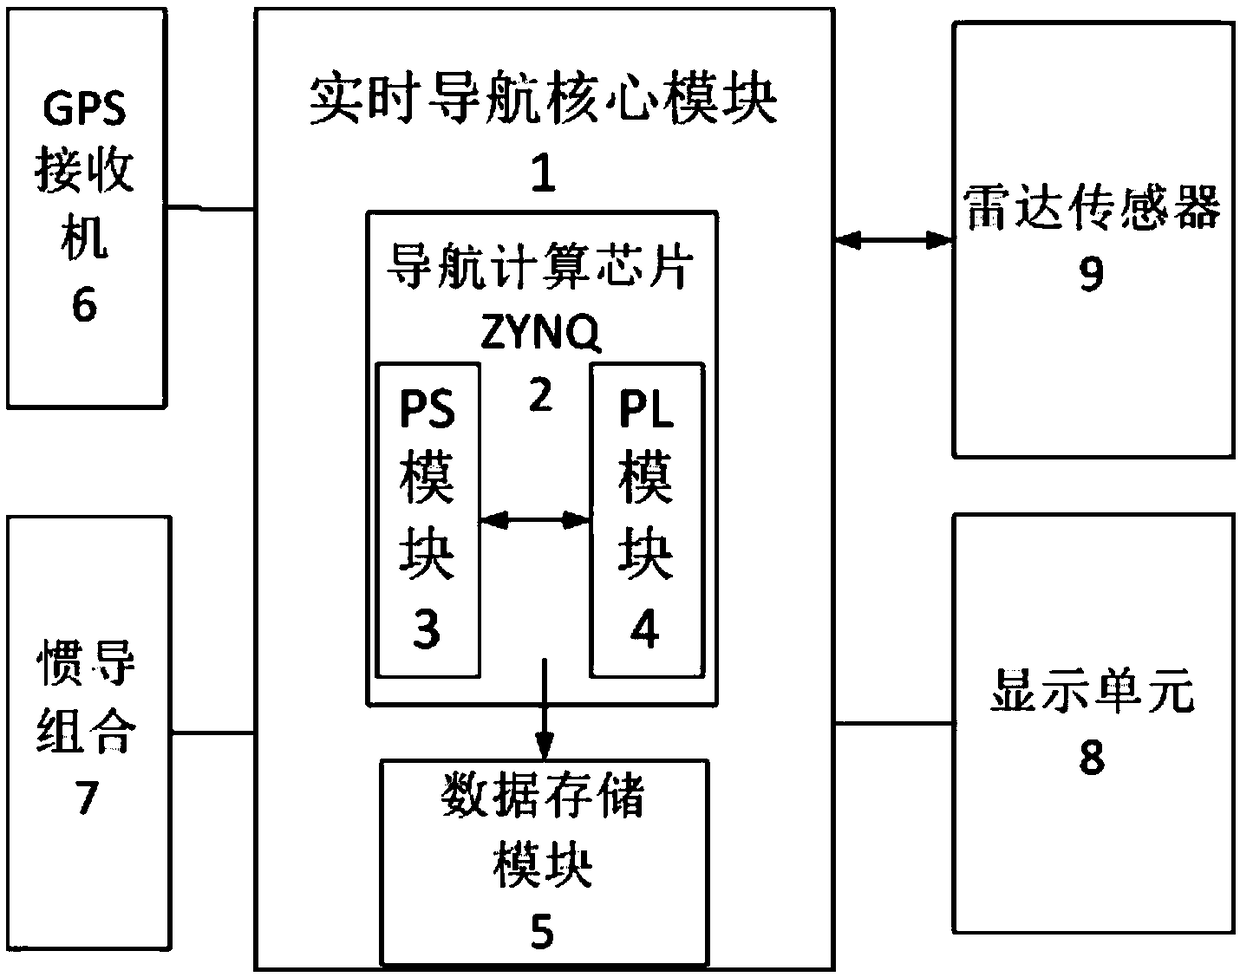 Real-time flight control navigation system and method based on ZYNQ processor